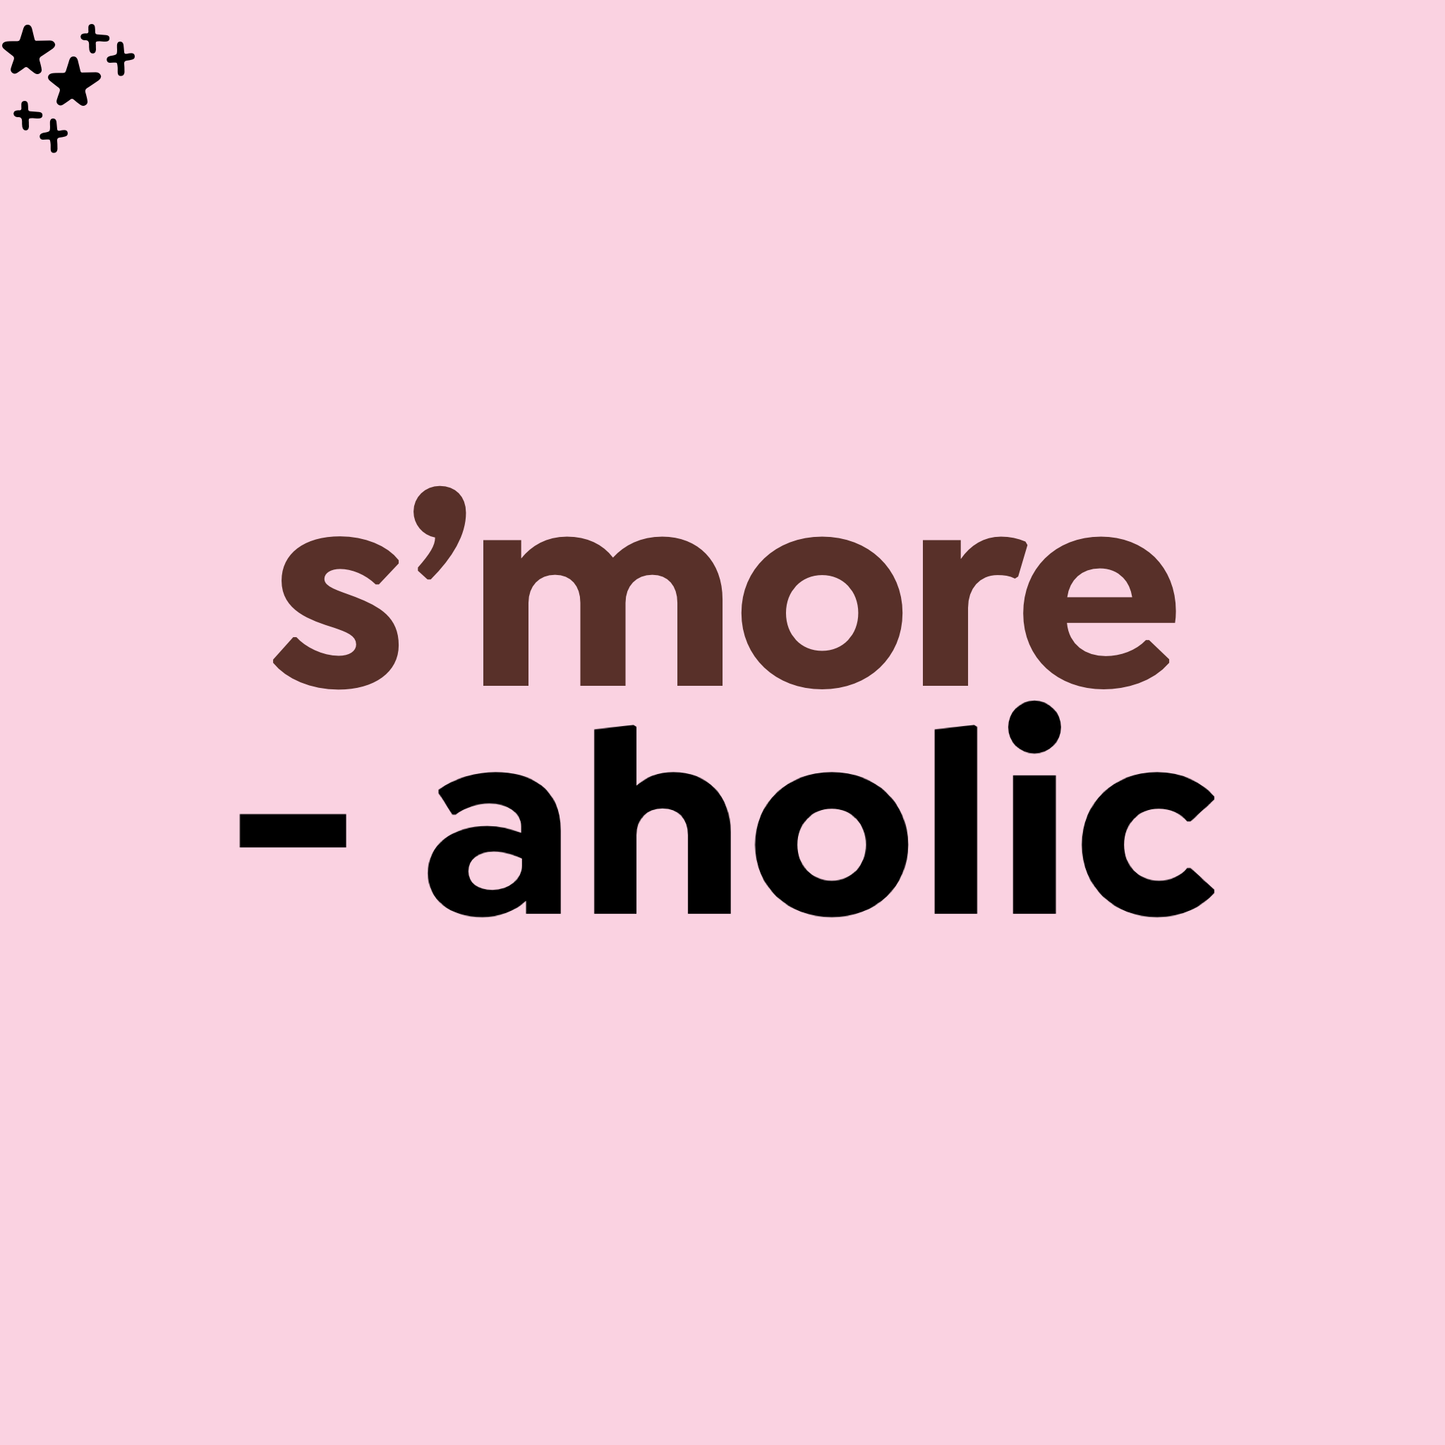 S’more-aholic